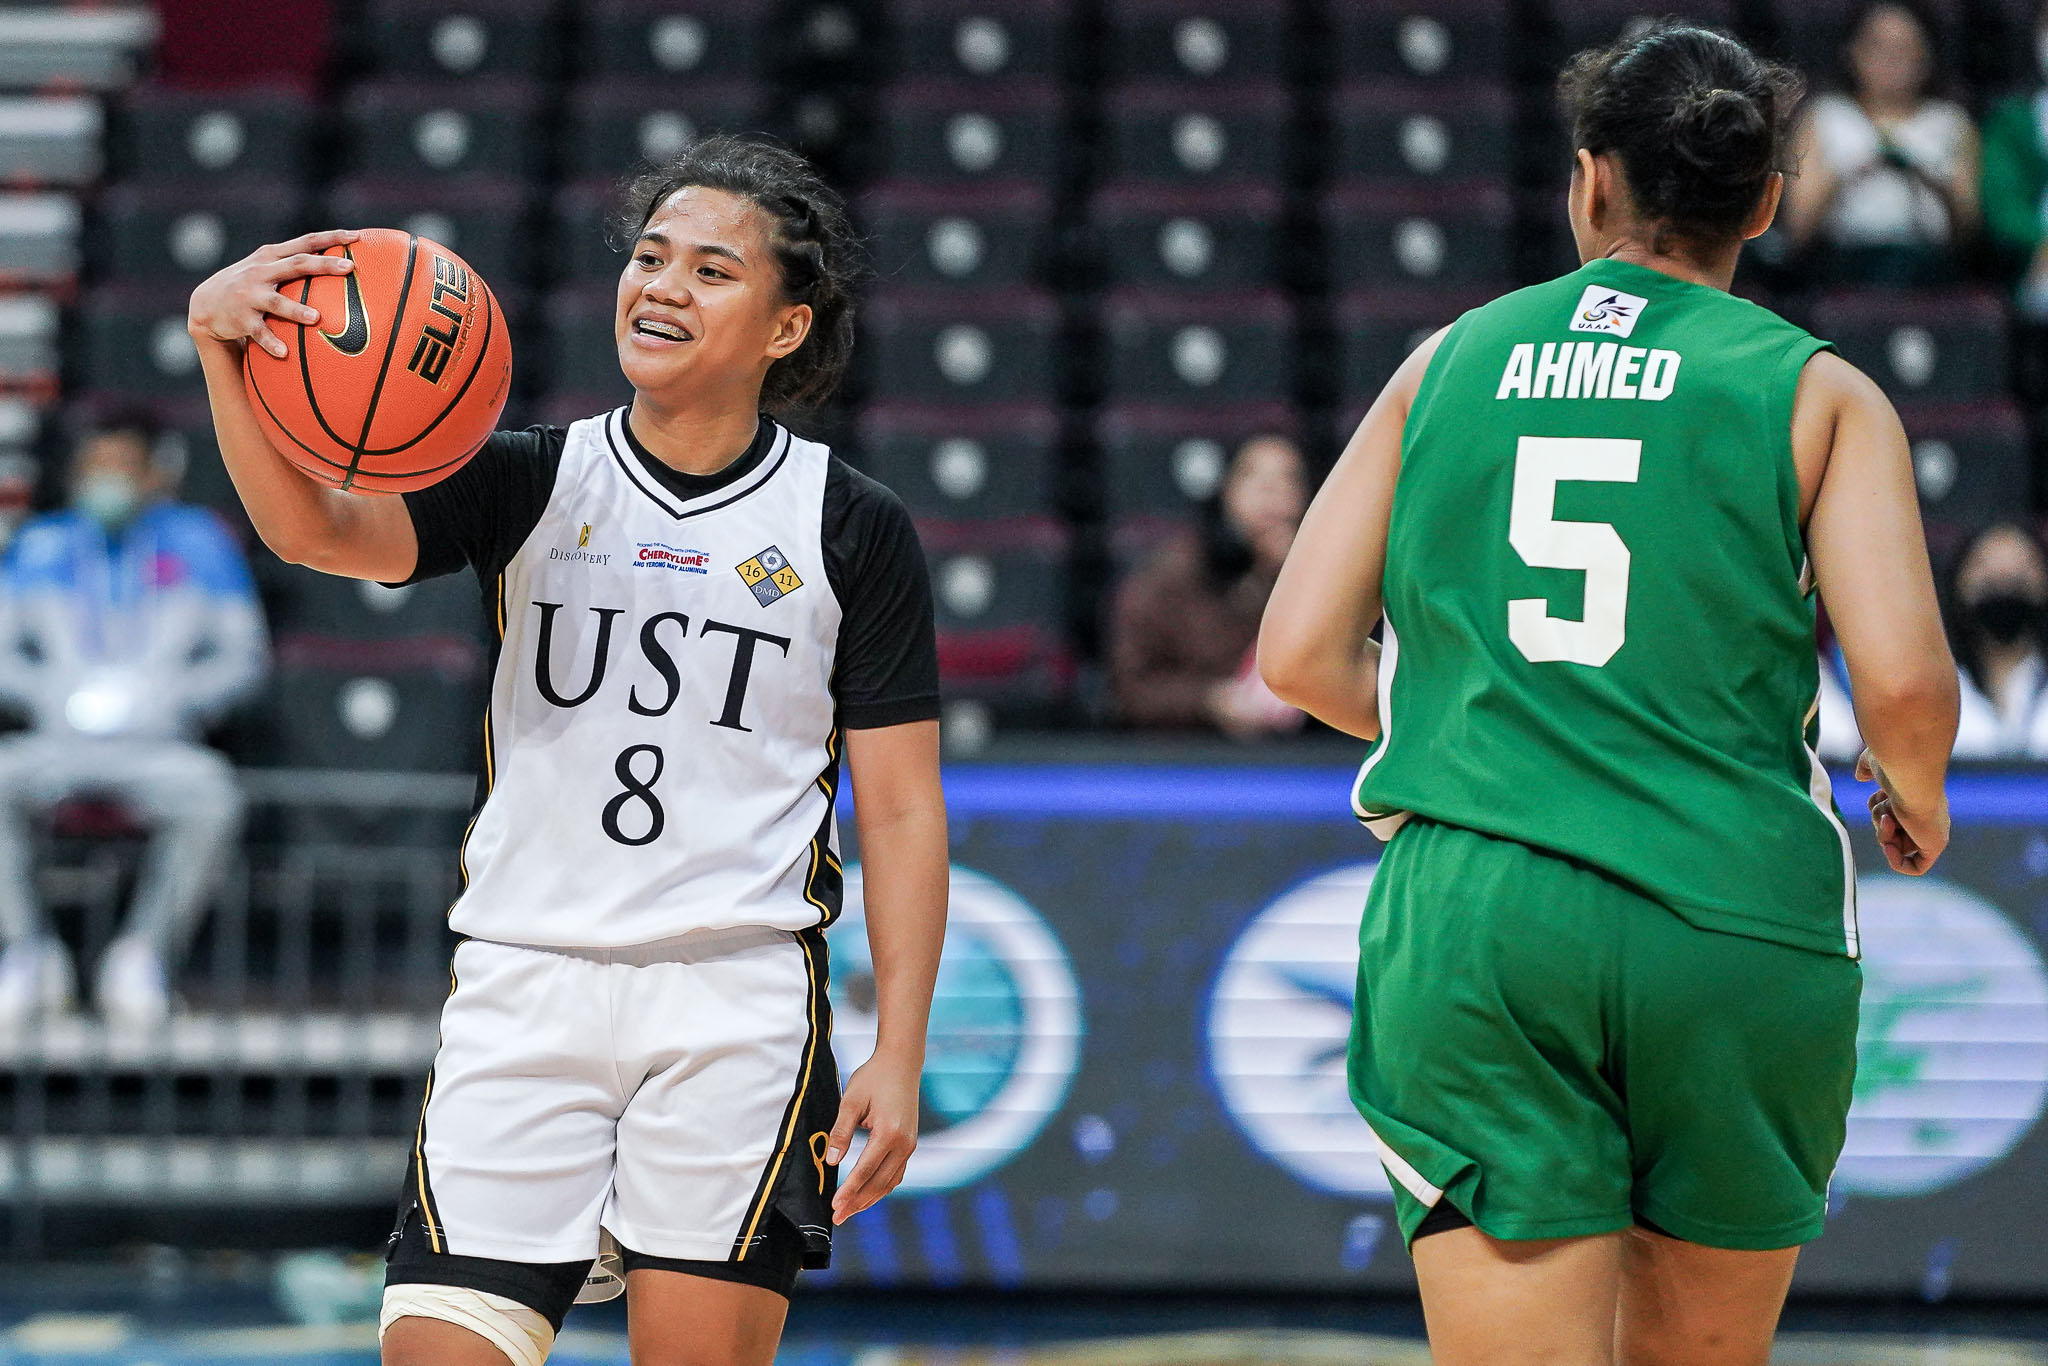 UAAP-WBB-Eka-Soriano-UST-1-1 Haydee Ong remains proud of 'special' batch of UST Growling Tigresses Basketball News UAAP UST  - philippine sports news